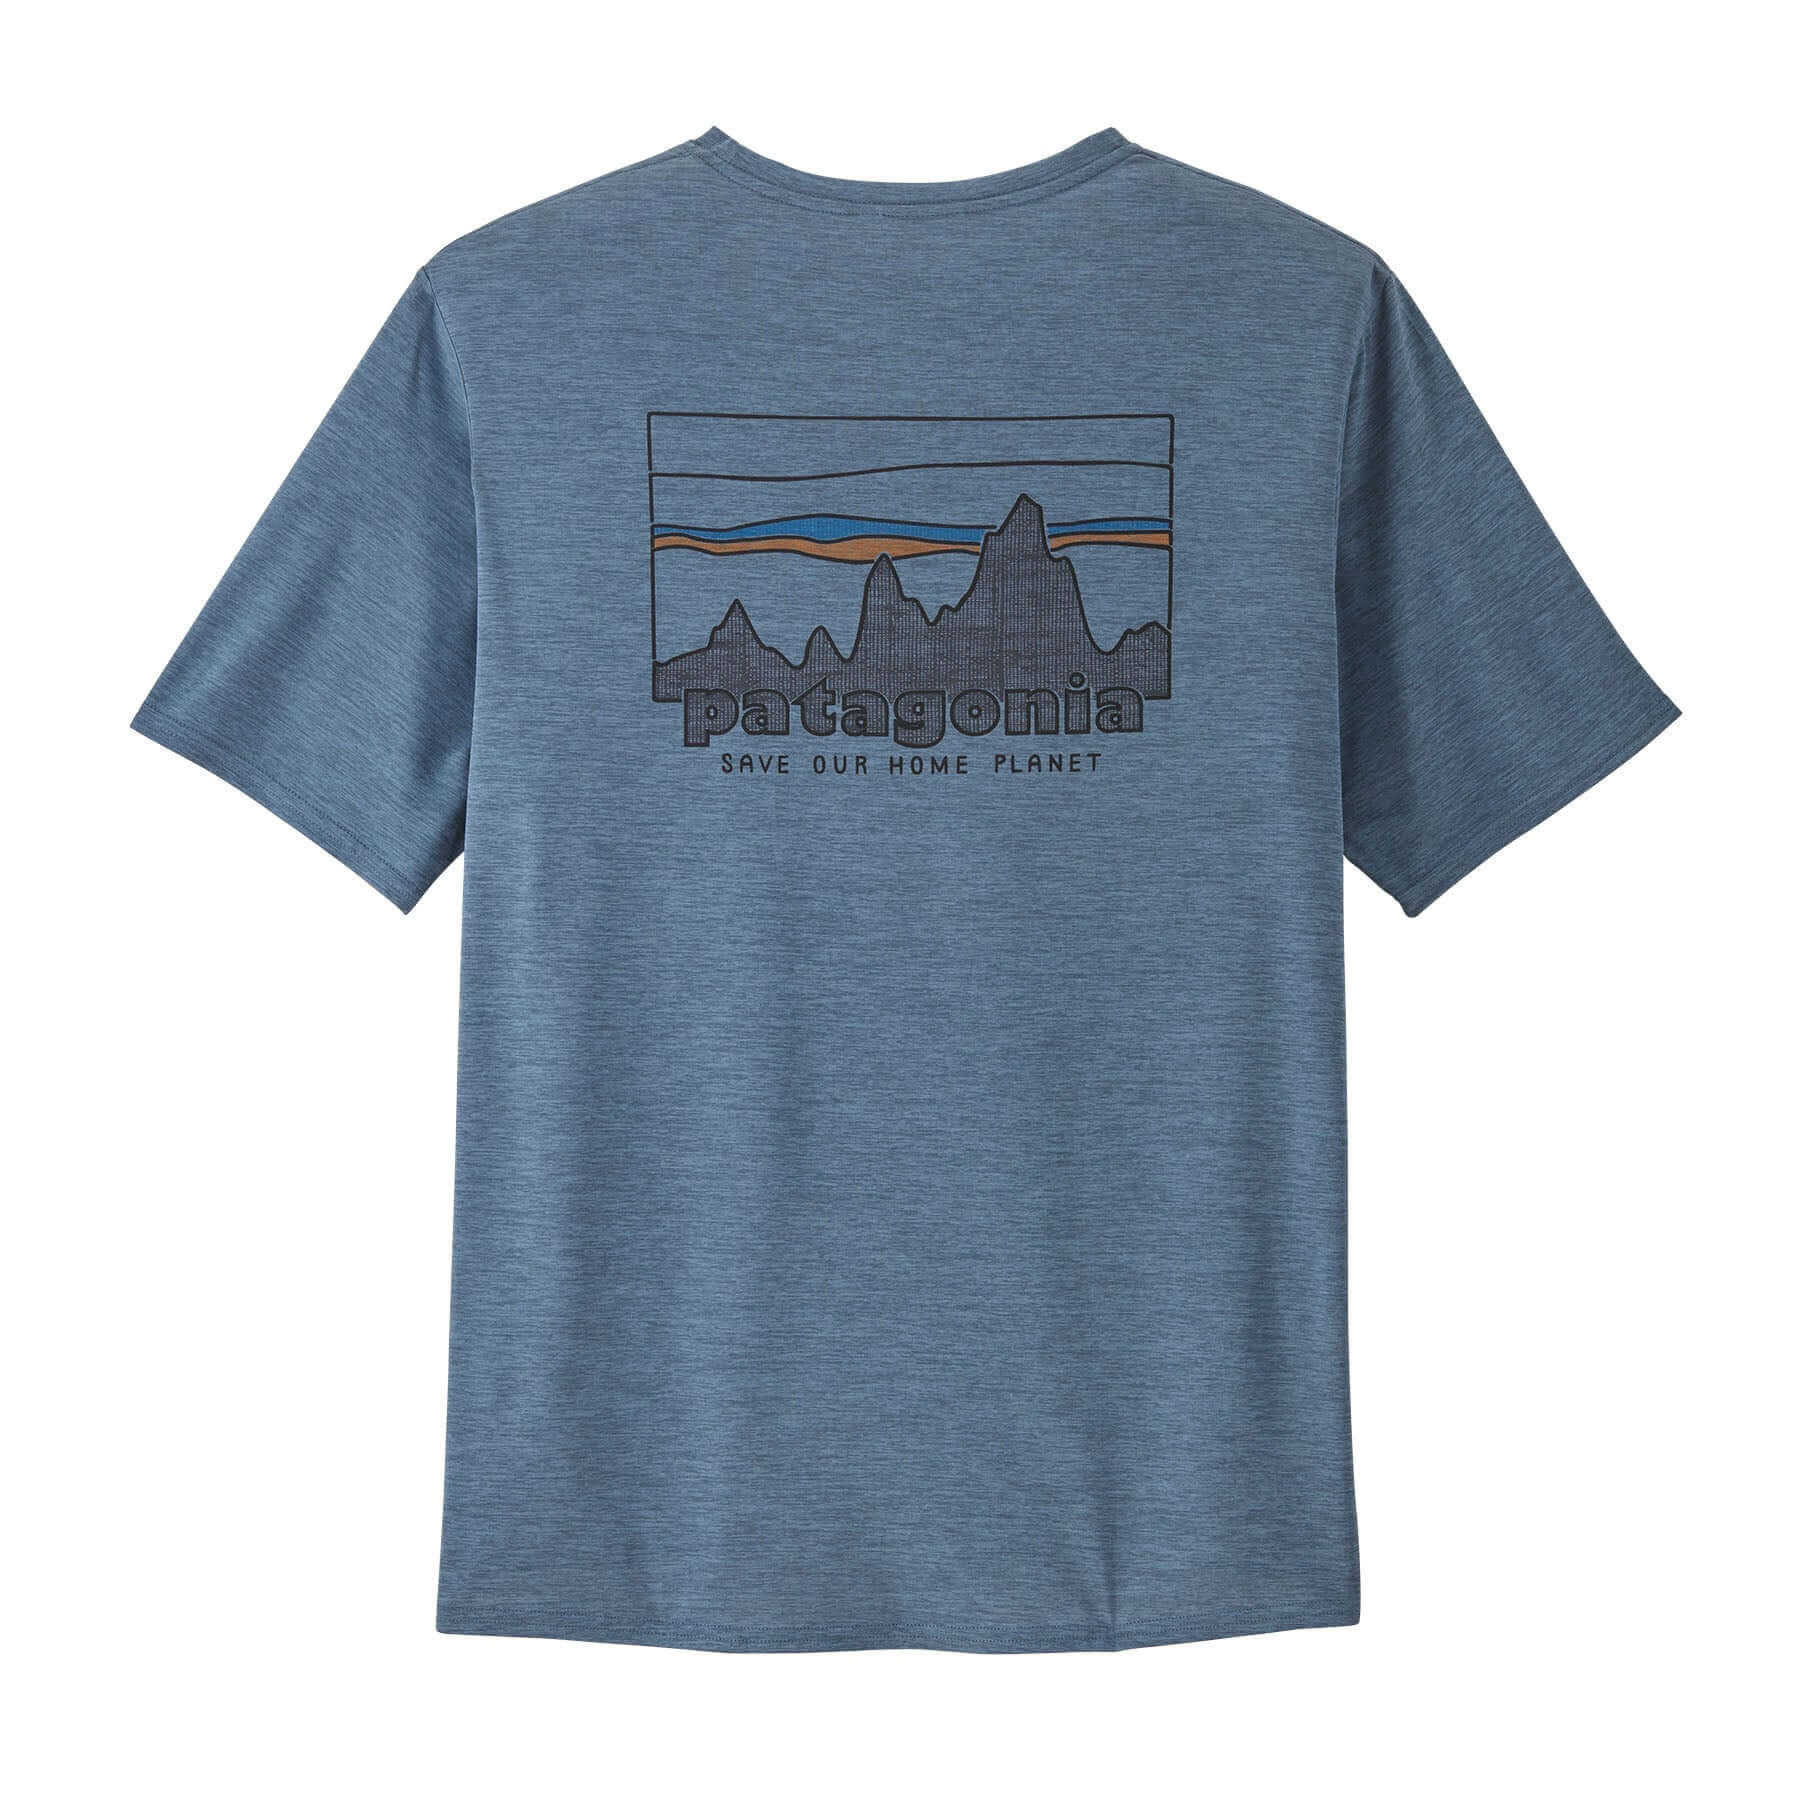 Men's Capilene® Cool Daily Graphic Shirt in 73 Skyline: Utility Blue X - Dye | Patagonia Bend